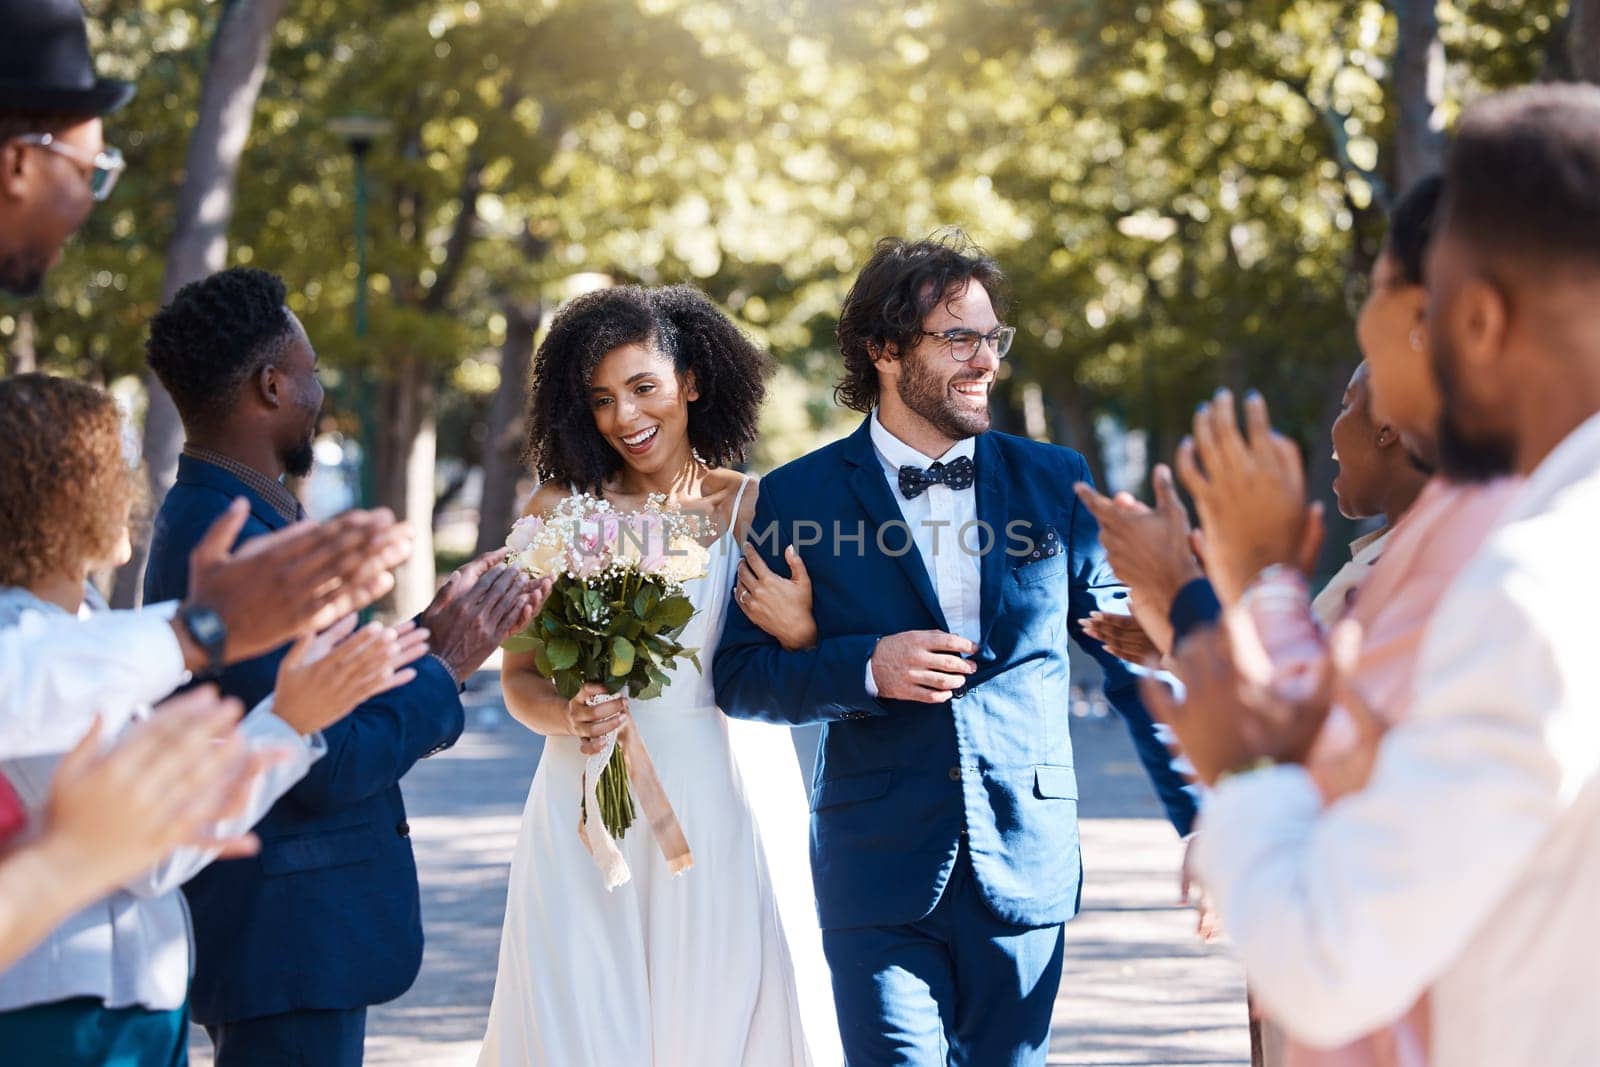 Happy celebration and clapping for couple at wedding with excited, joyful and cheerful crowd of guests. Interracial love and partnership of people at marriage event with applause and smile.